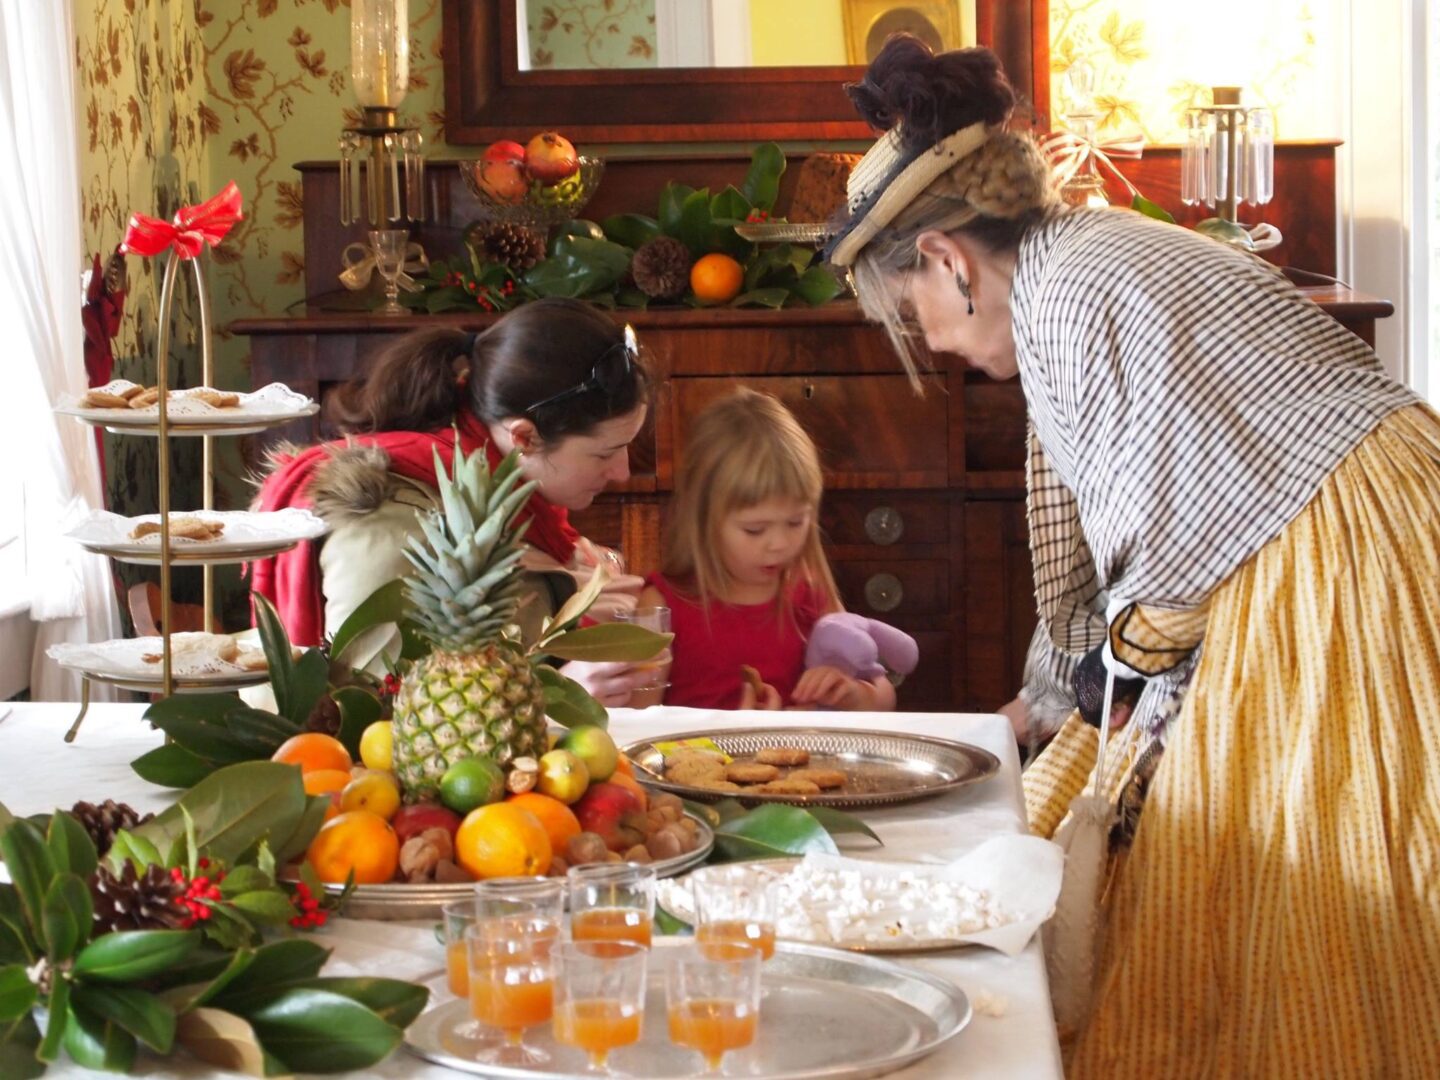 A group of women and children looking at a table full of food.